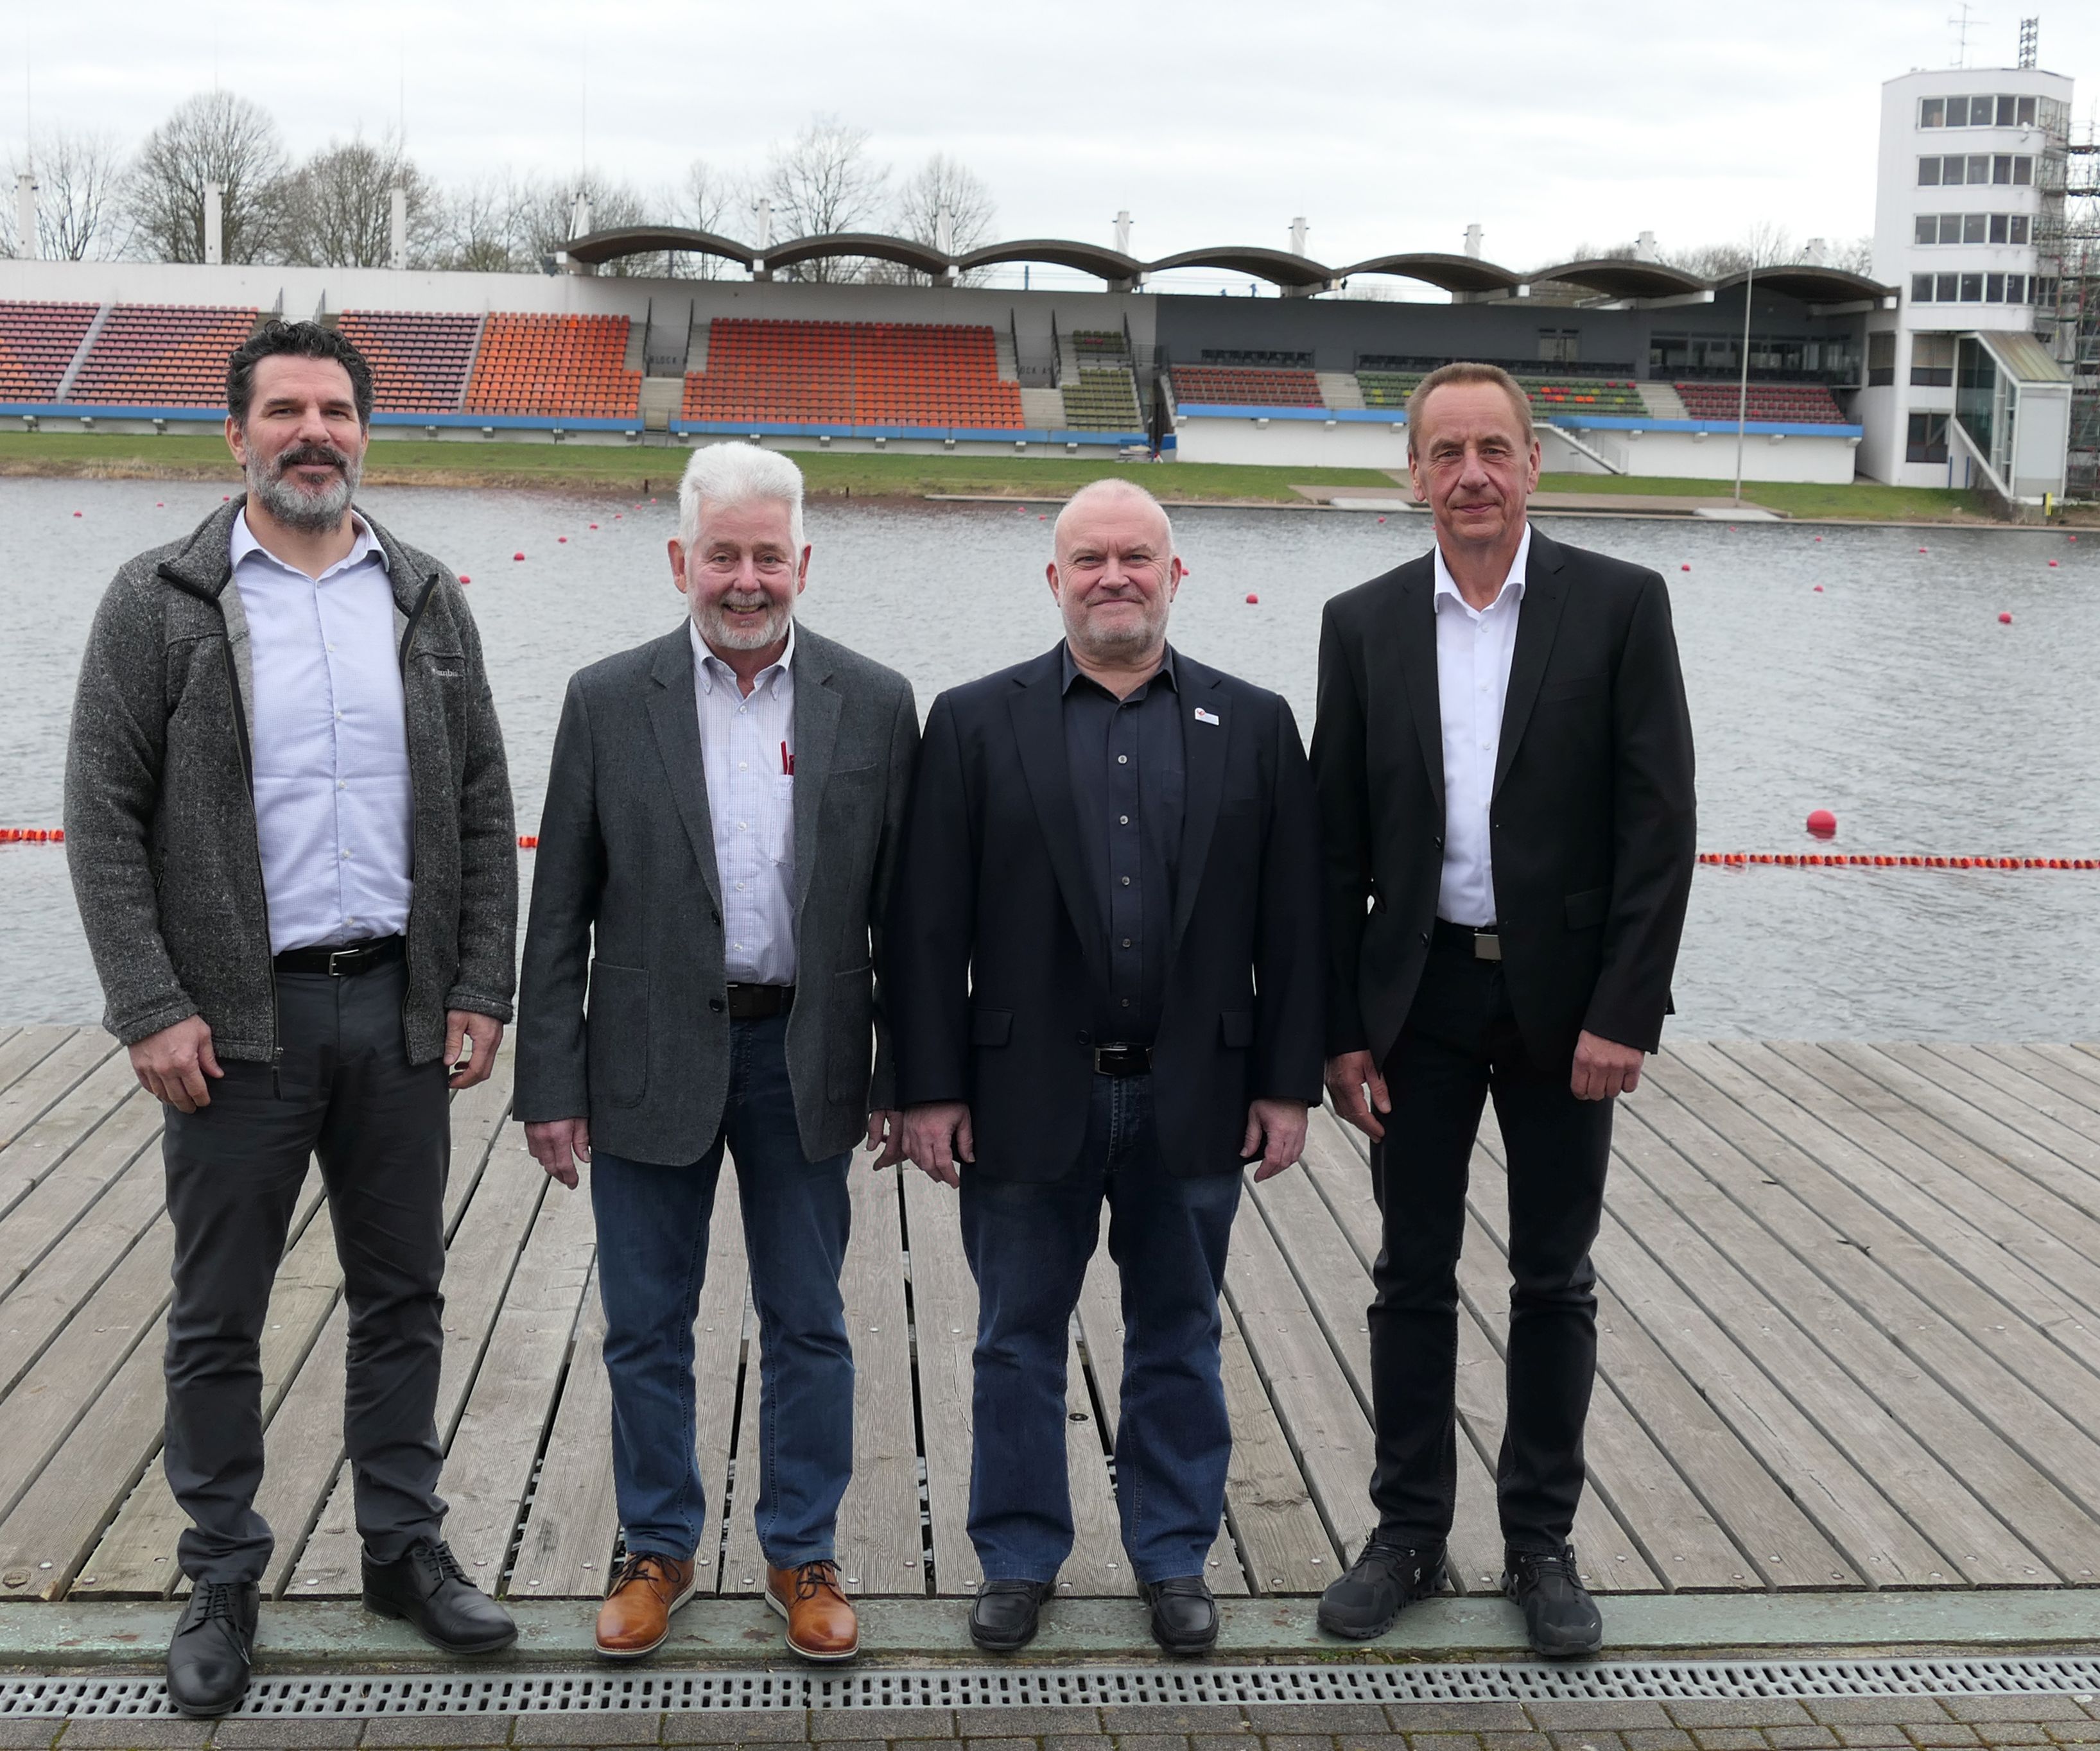 High-ranking visitor at the Duisburg regatta course: Jürgen Joachim, president of the Duisburg Kanu Regatta Verein (2nd from right), informed (from left) ICF Event Manager Balint Vekassy, Jens Perlwitz, president of the German Canoe Federation, and Thomas Konietzko, president of the world federation ICF, about the status of preparations for the 2023 World Canoe Championship (Aug. 23 - 27).  - Photo: Kanu Regatta Verein/German Canoe Federation - Oliver Strubel